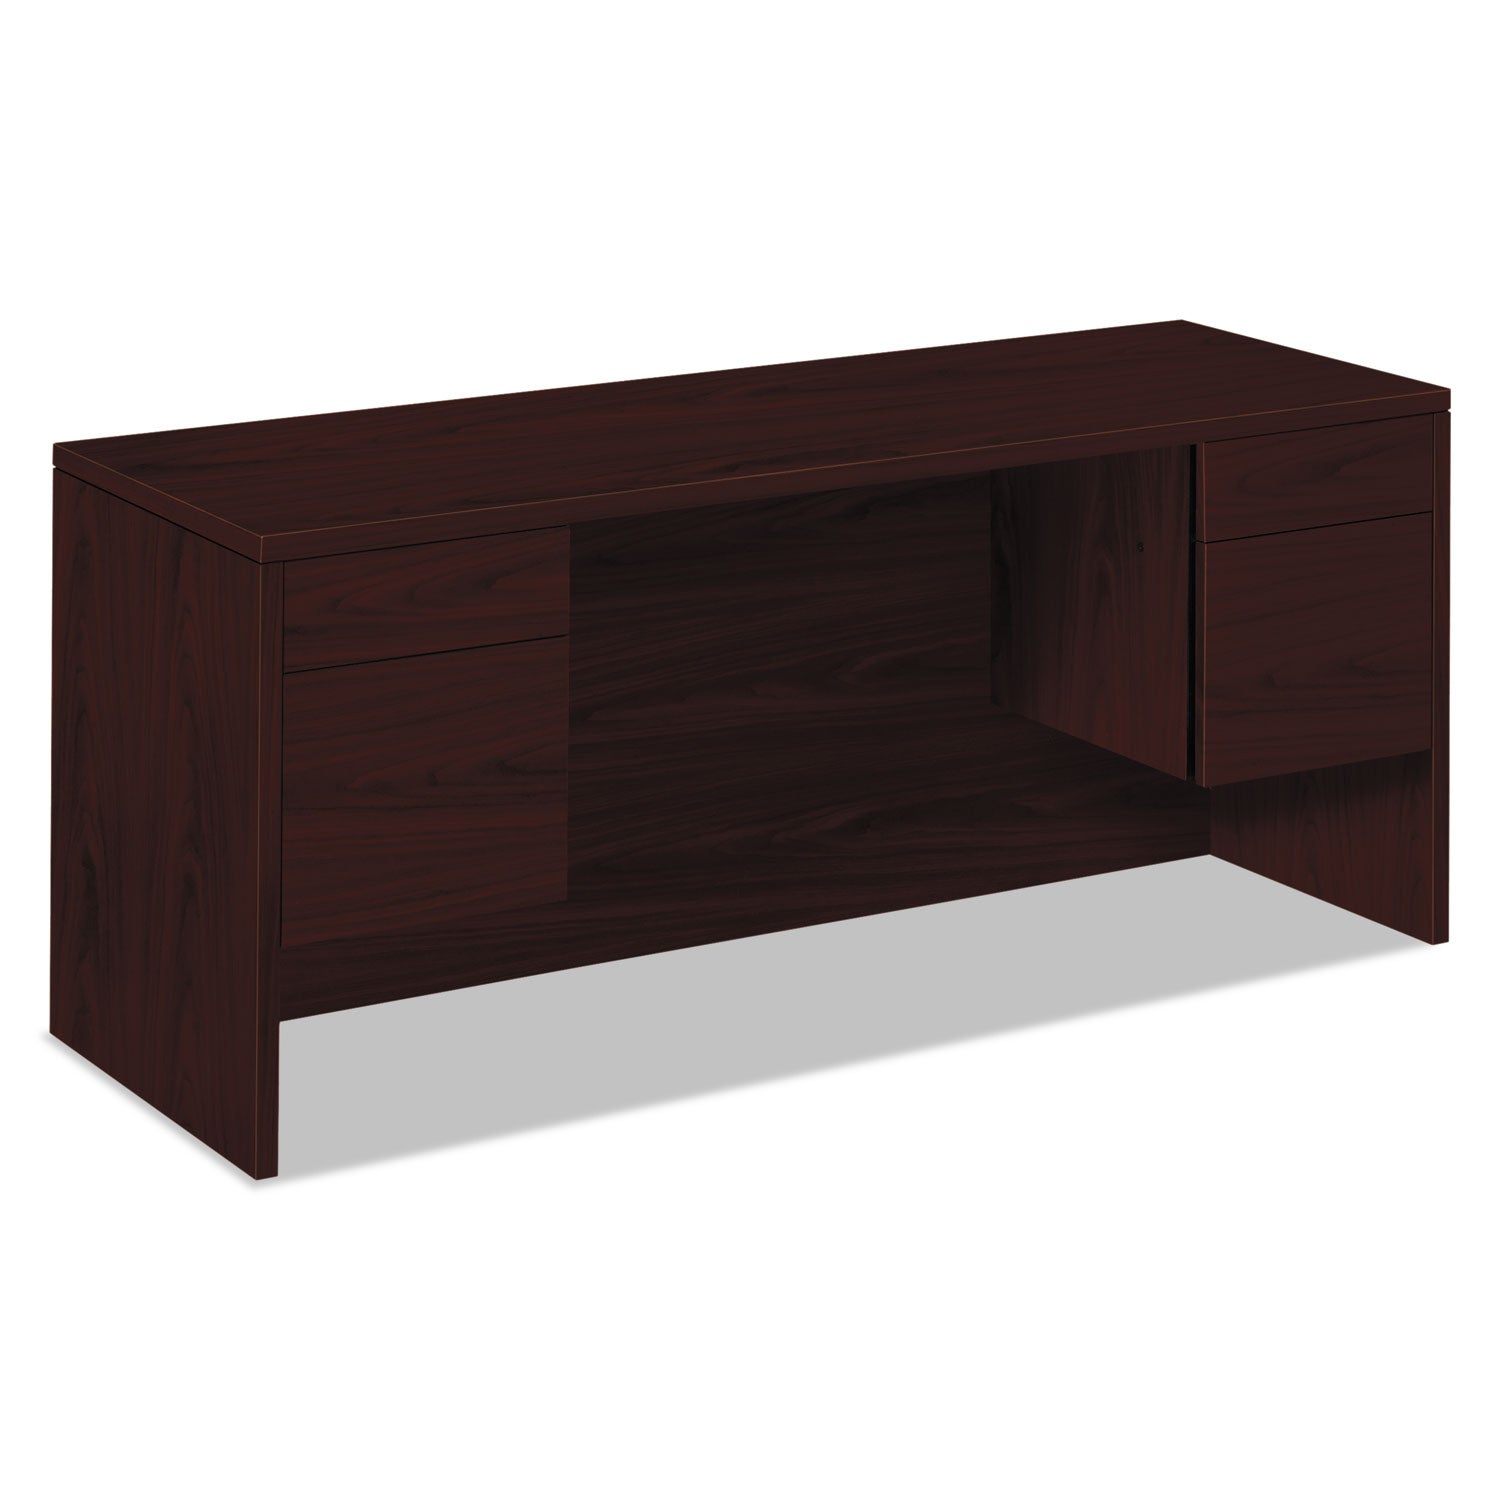 10500 Series Kneespace Credenza With 3/4-Height Pedestals, 60w x 24d x 29.5h, Mahogany - 